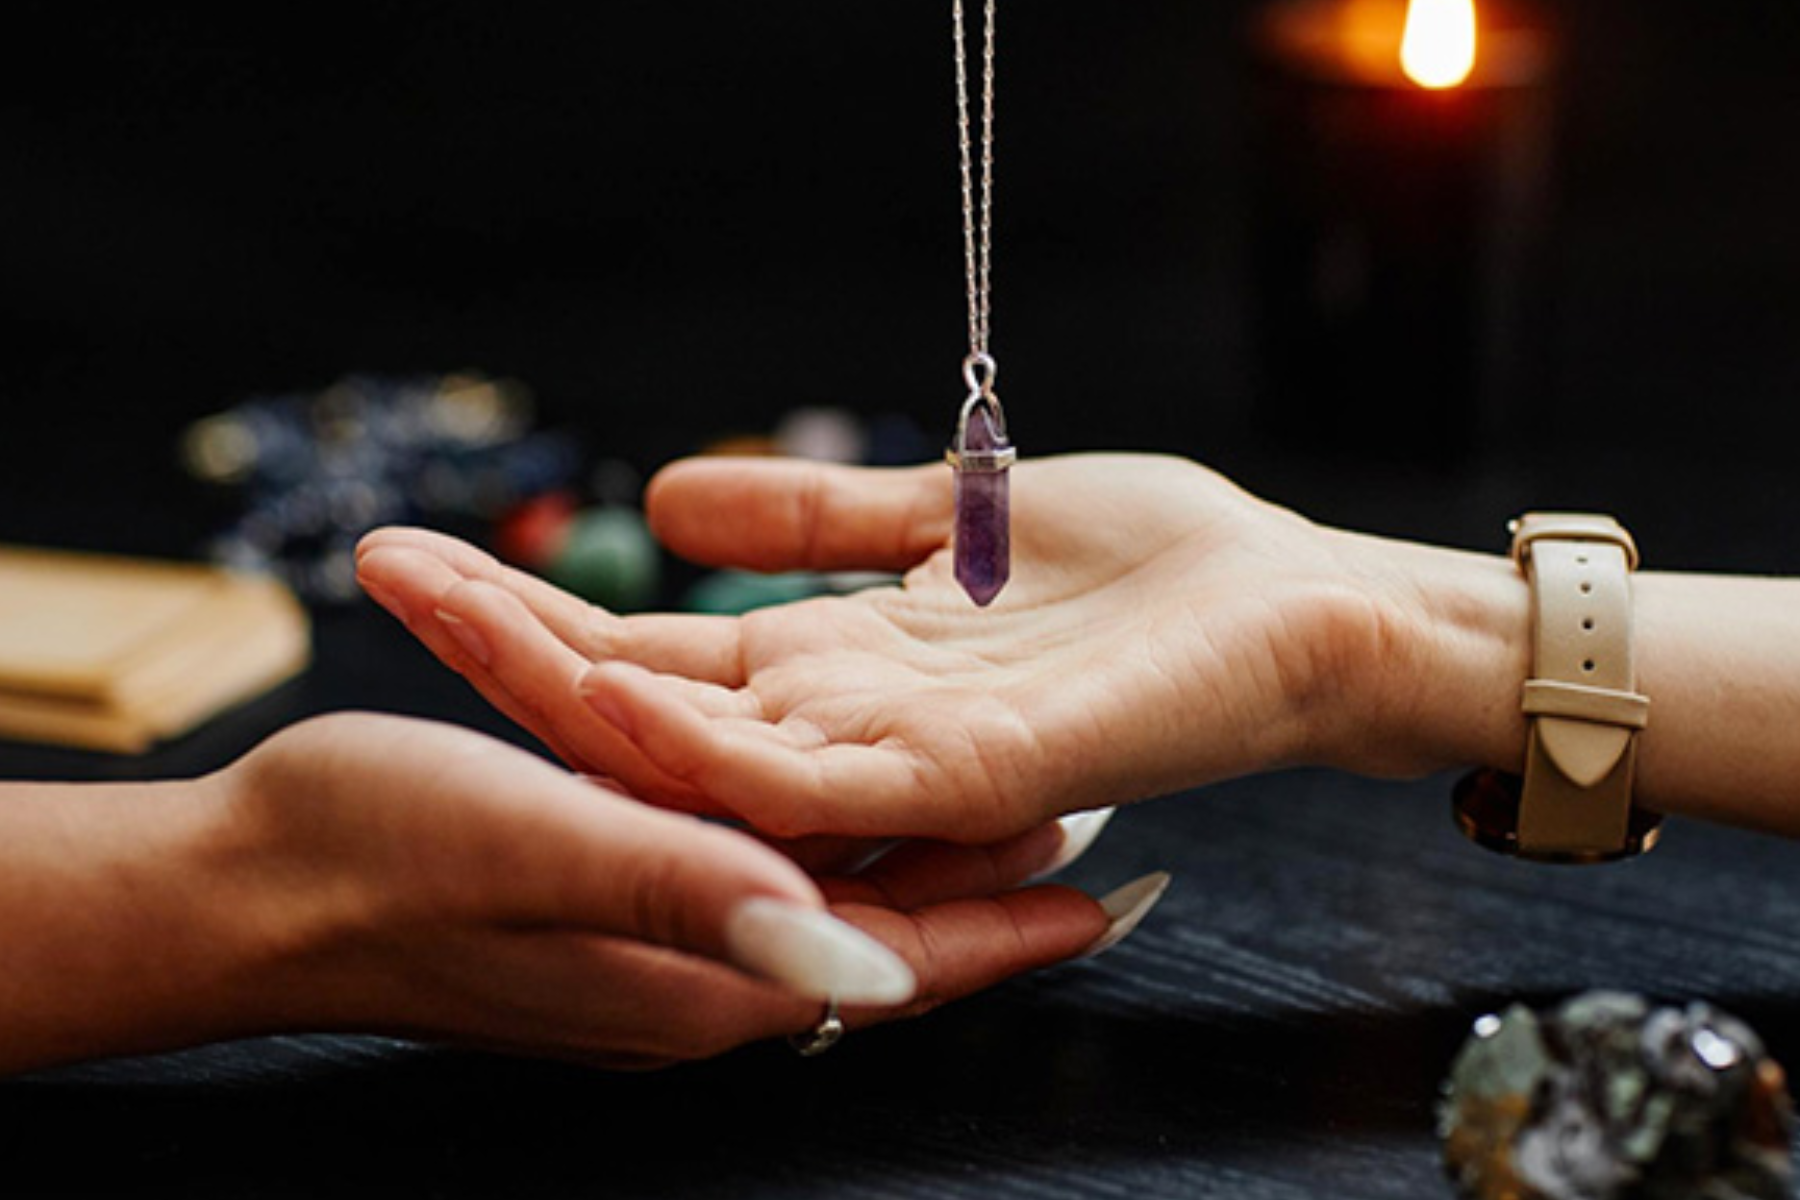 A woman's palm with an amethyst pendulum